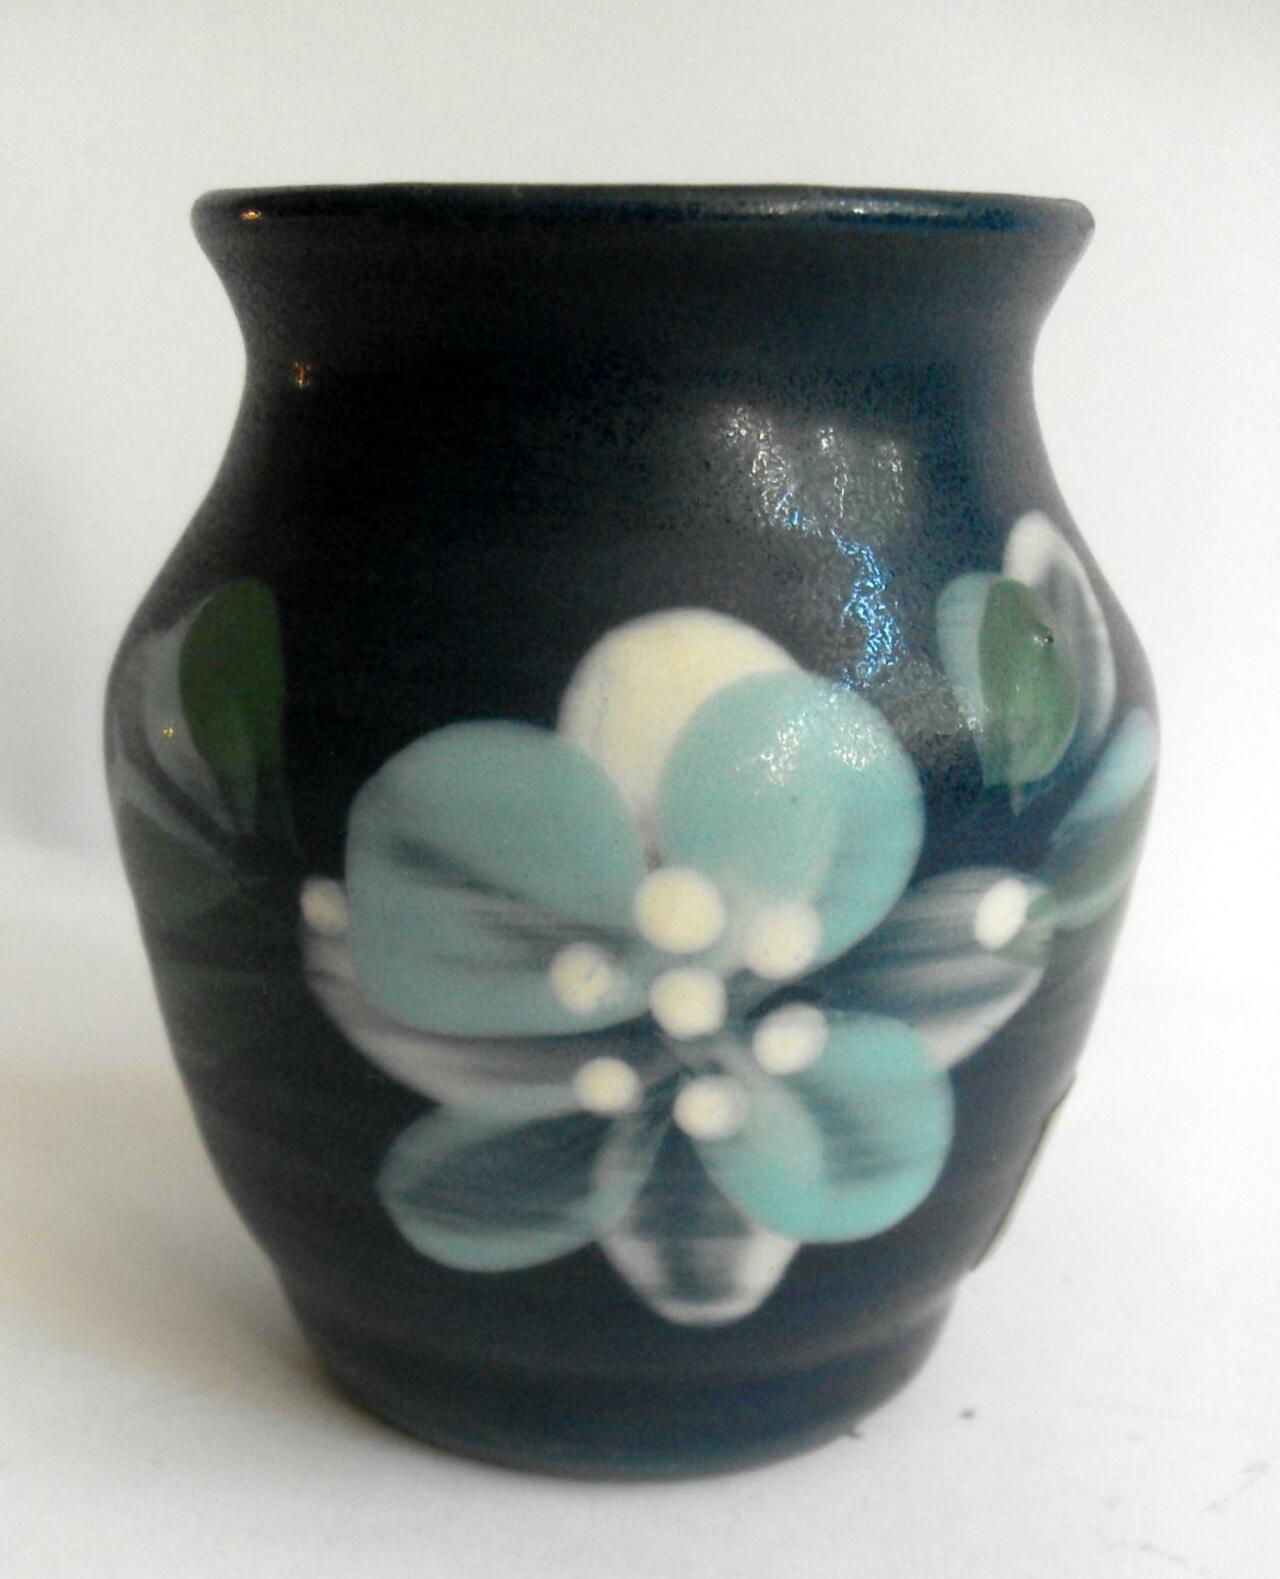 NEW TO US
Haseley Manor pot/tidy #IOW £12/offers inc UKPost
Tweet/DM us for details
#CCUK4S #FollowVintage #ceramics http://t.co/R24DbsdFdR